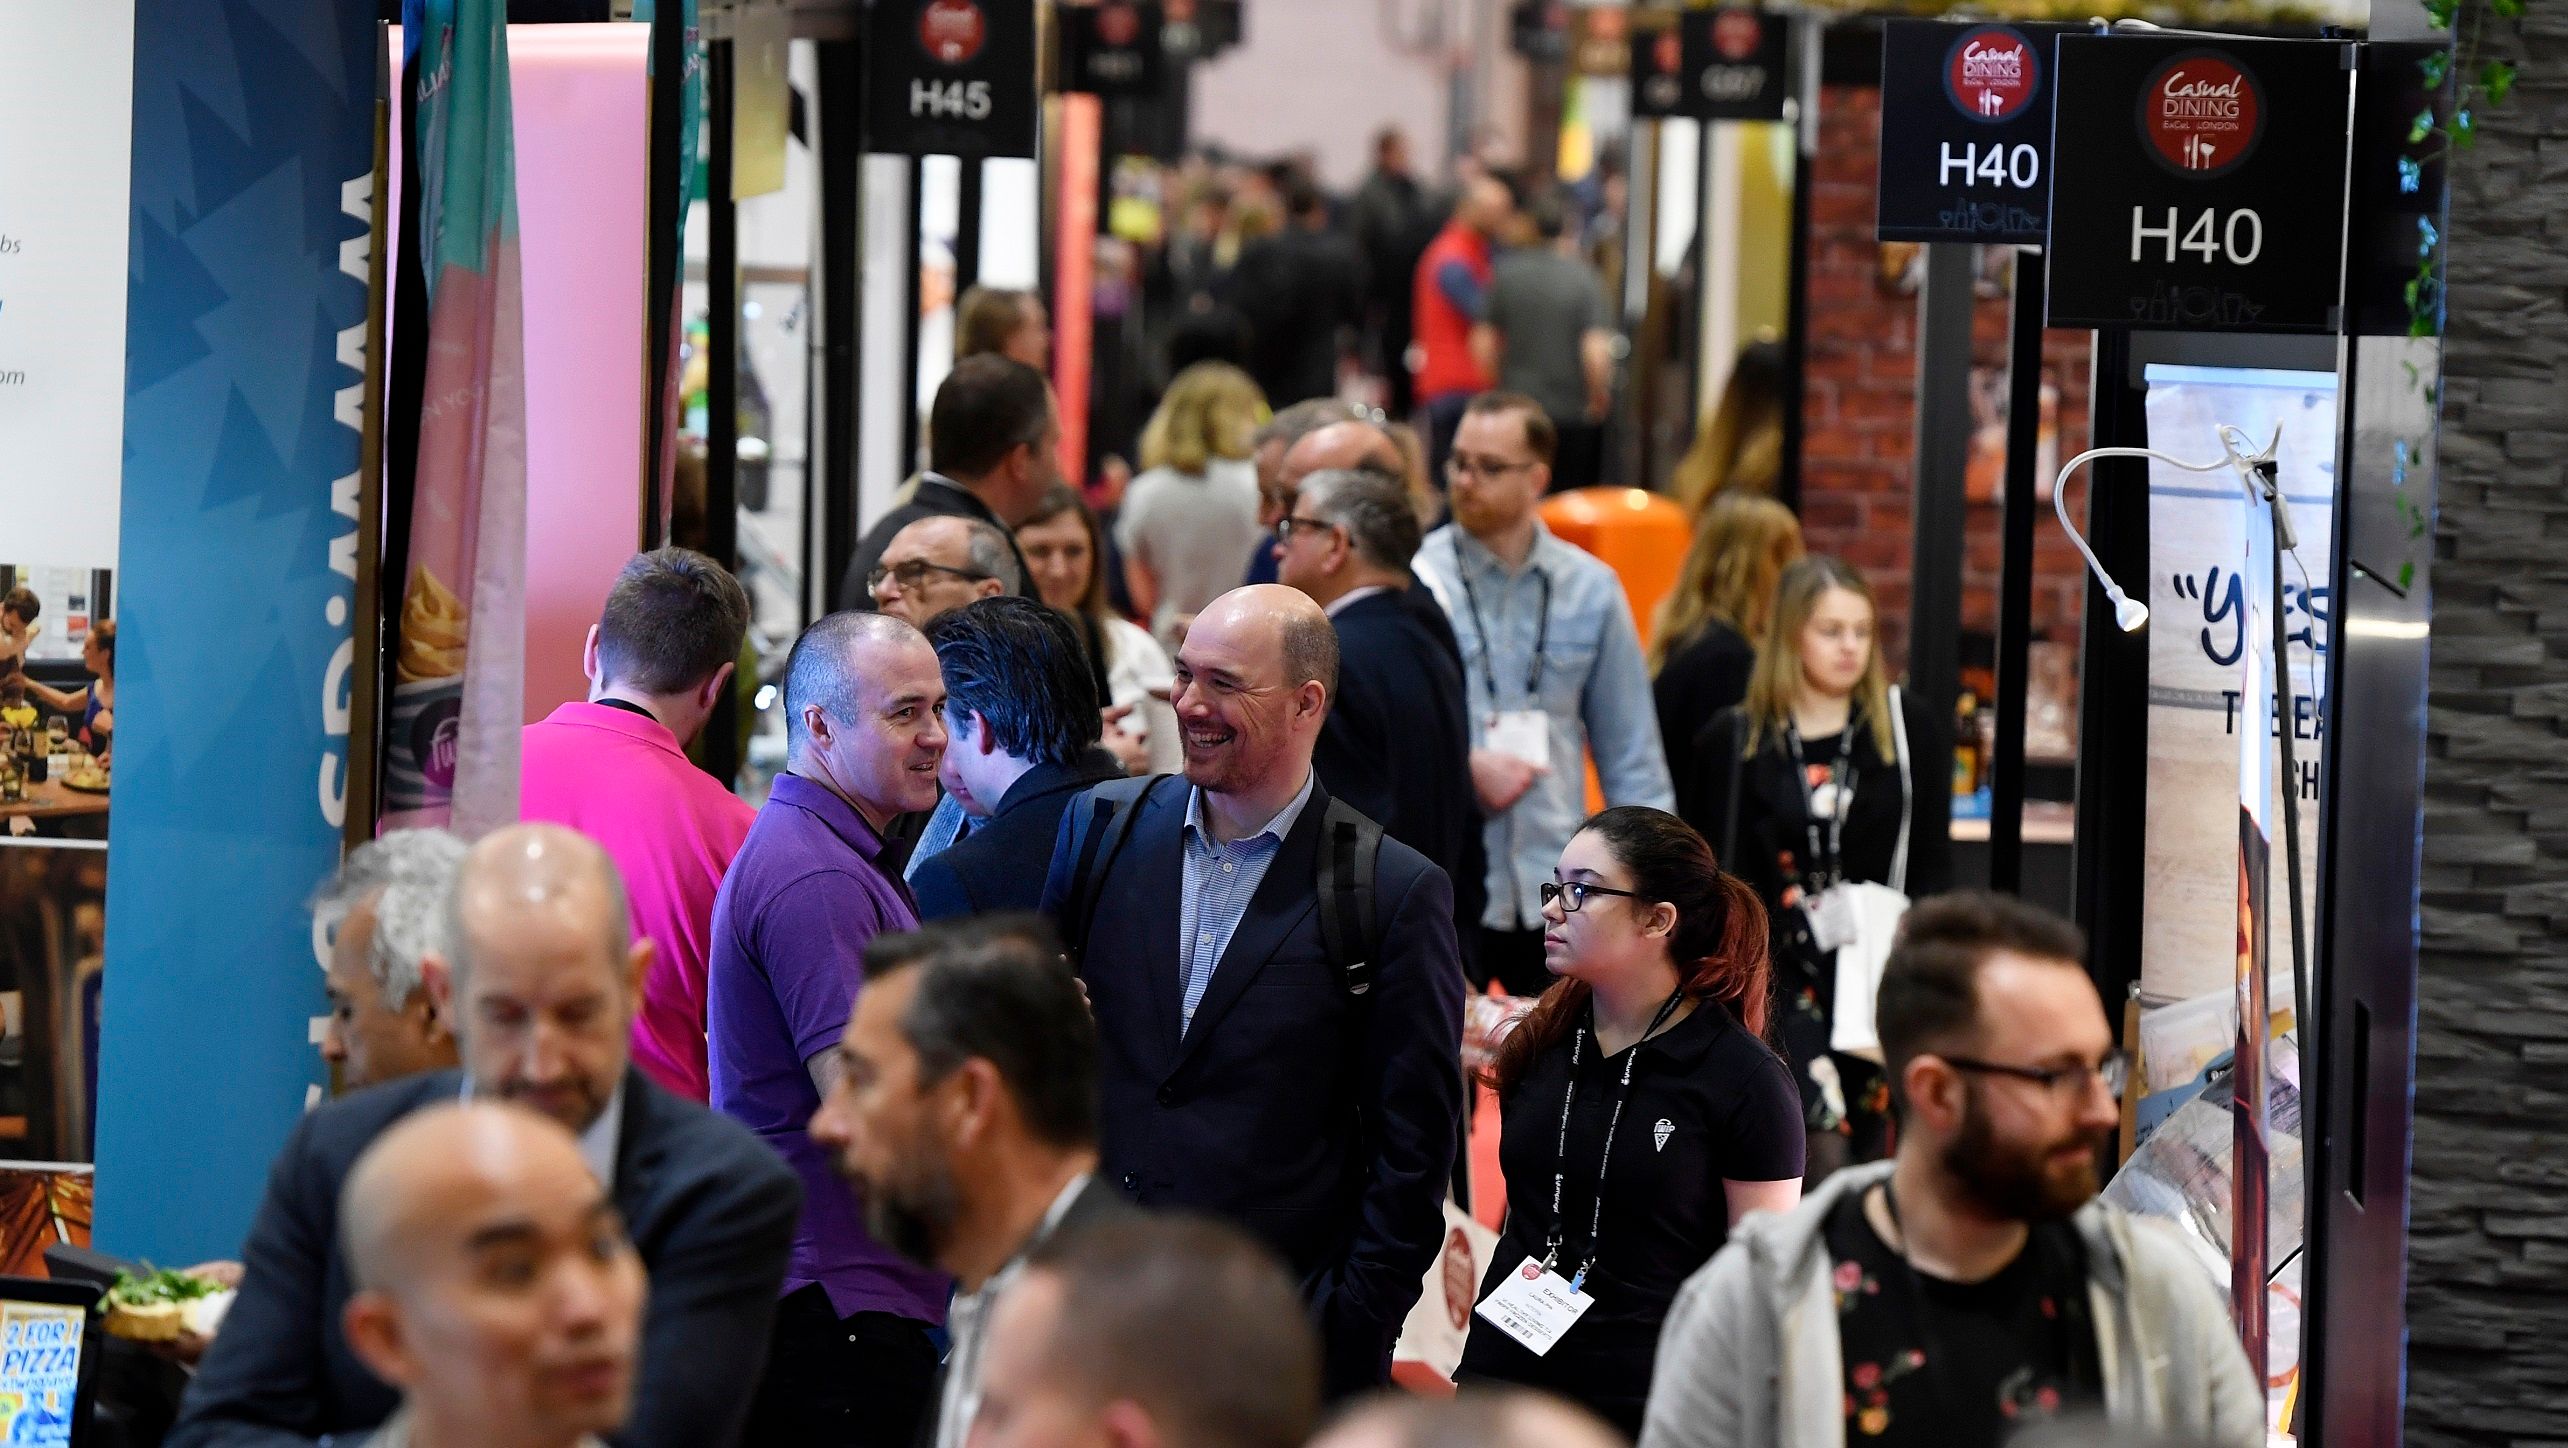 Join us at the Casual Dining next month in London's ExCeL